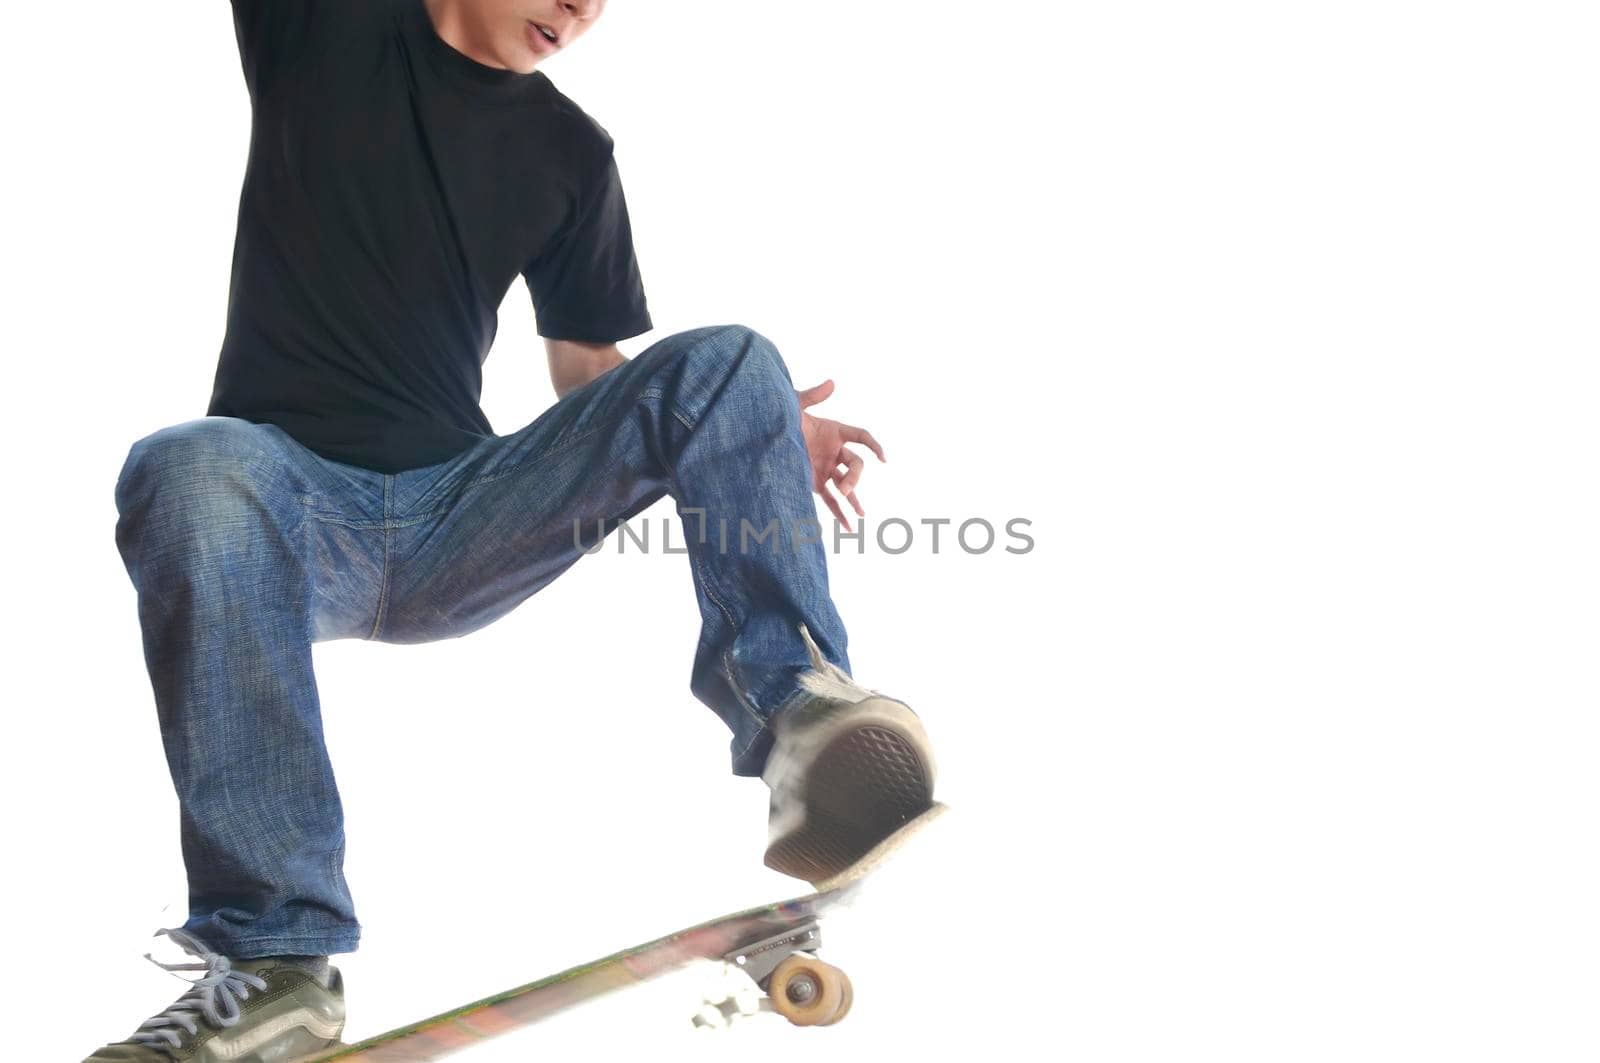 Boy practicing skate in a skate park - isolated